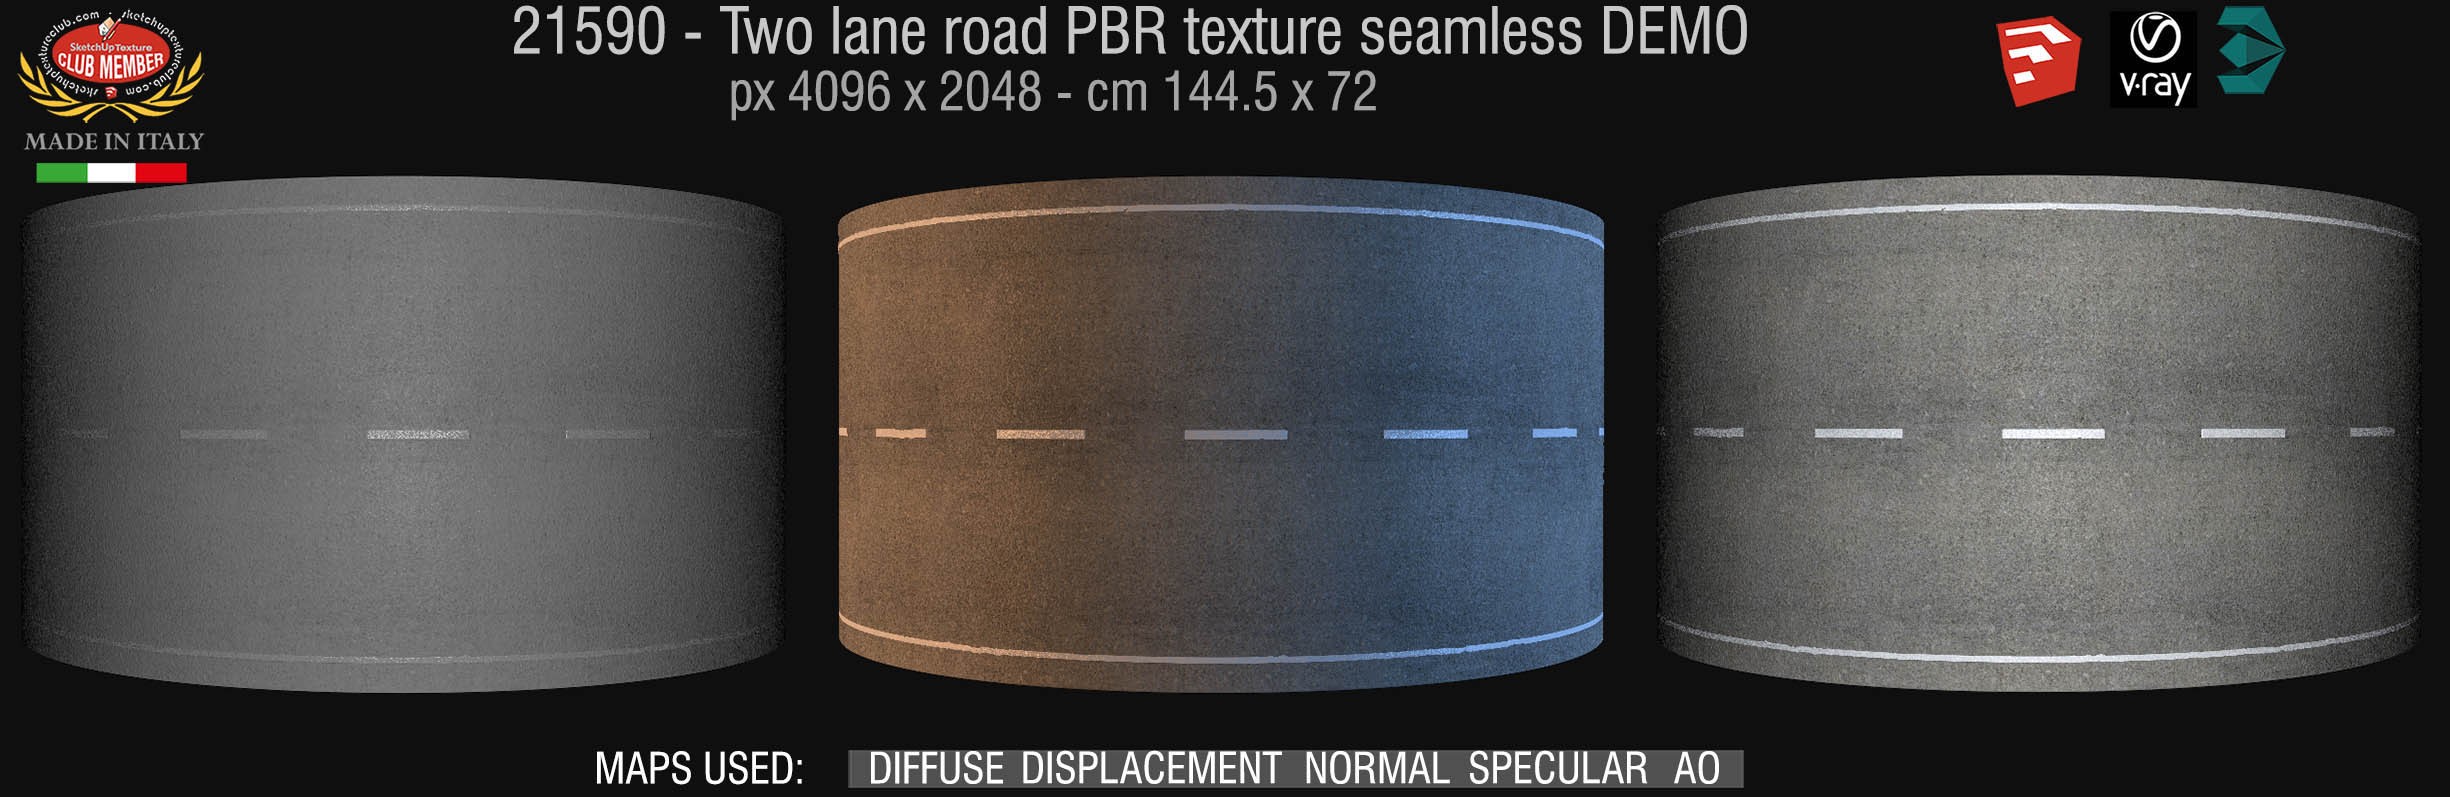 21590 Two lane road clean PRB texture seamless DEMO